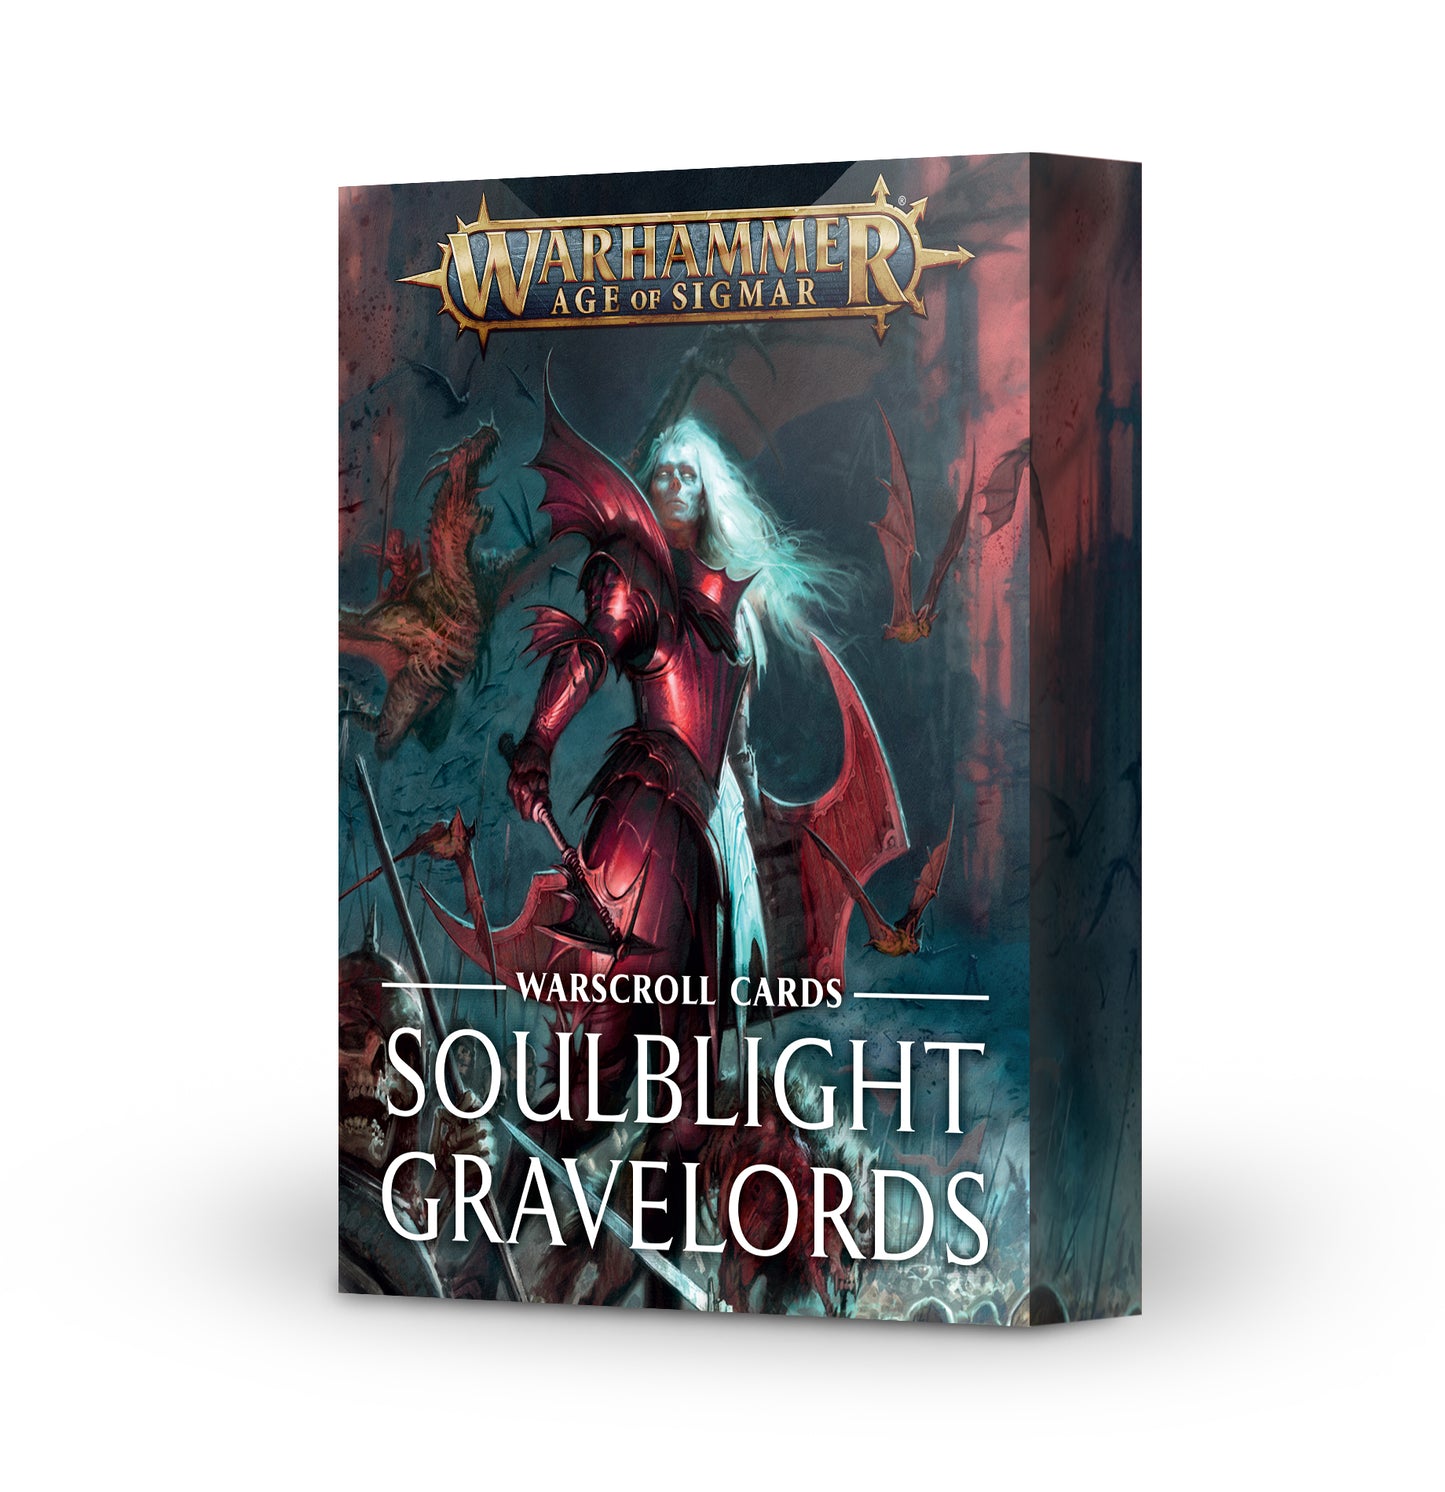 AOS - Age of Sigmar: Warscroll Cards Soulblight Gravelords